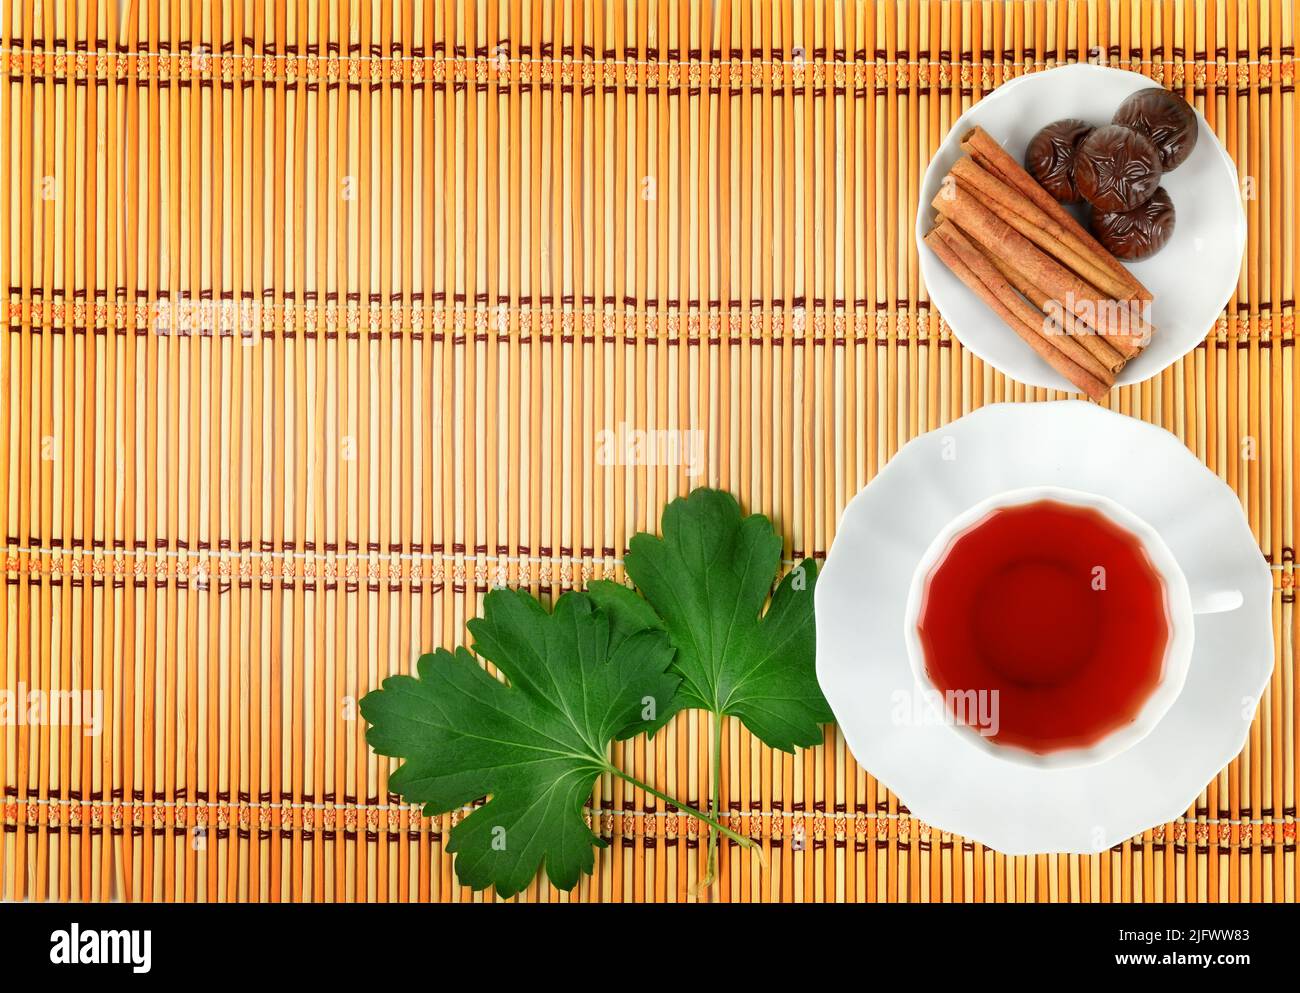 Hot tea with spices on a bamboo mat background Stock Photo